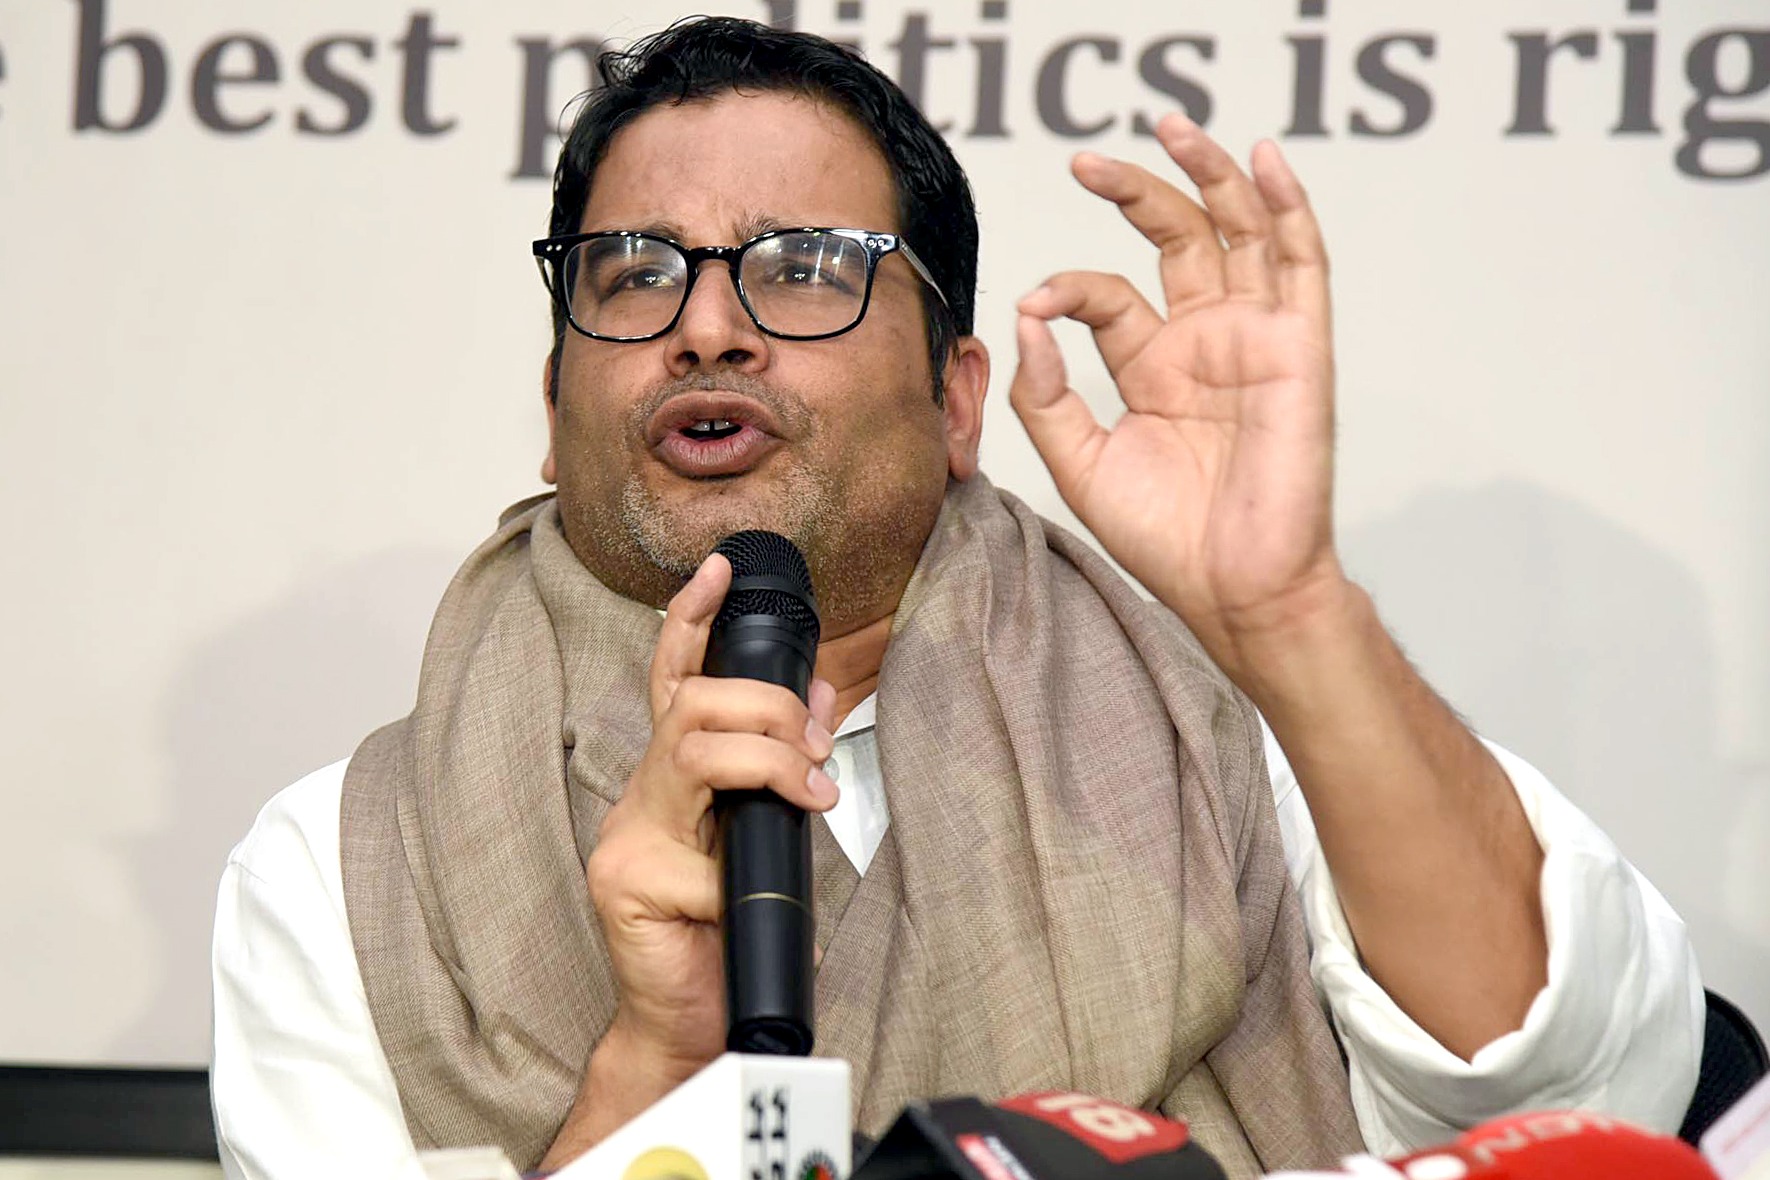 If BJP wins more than double digit seats I will leave Twitter says Prashant Kishor